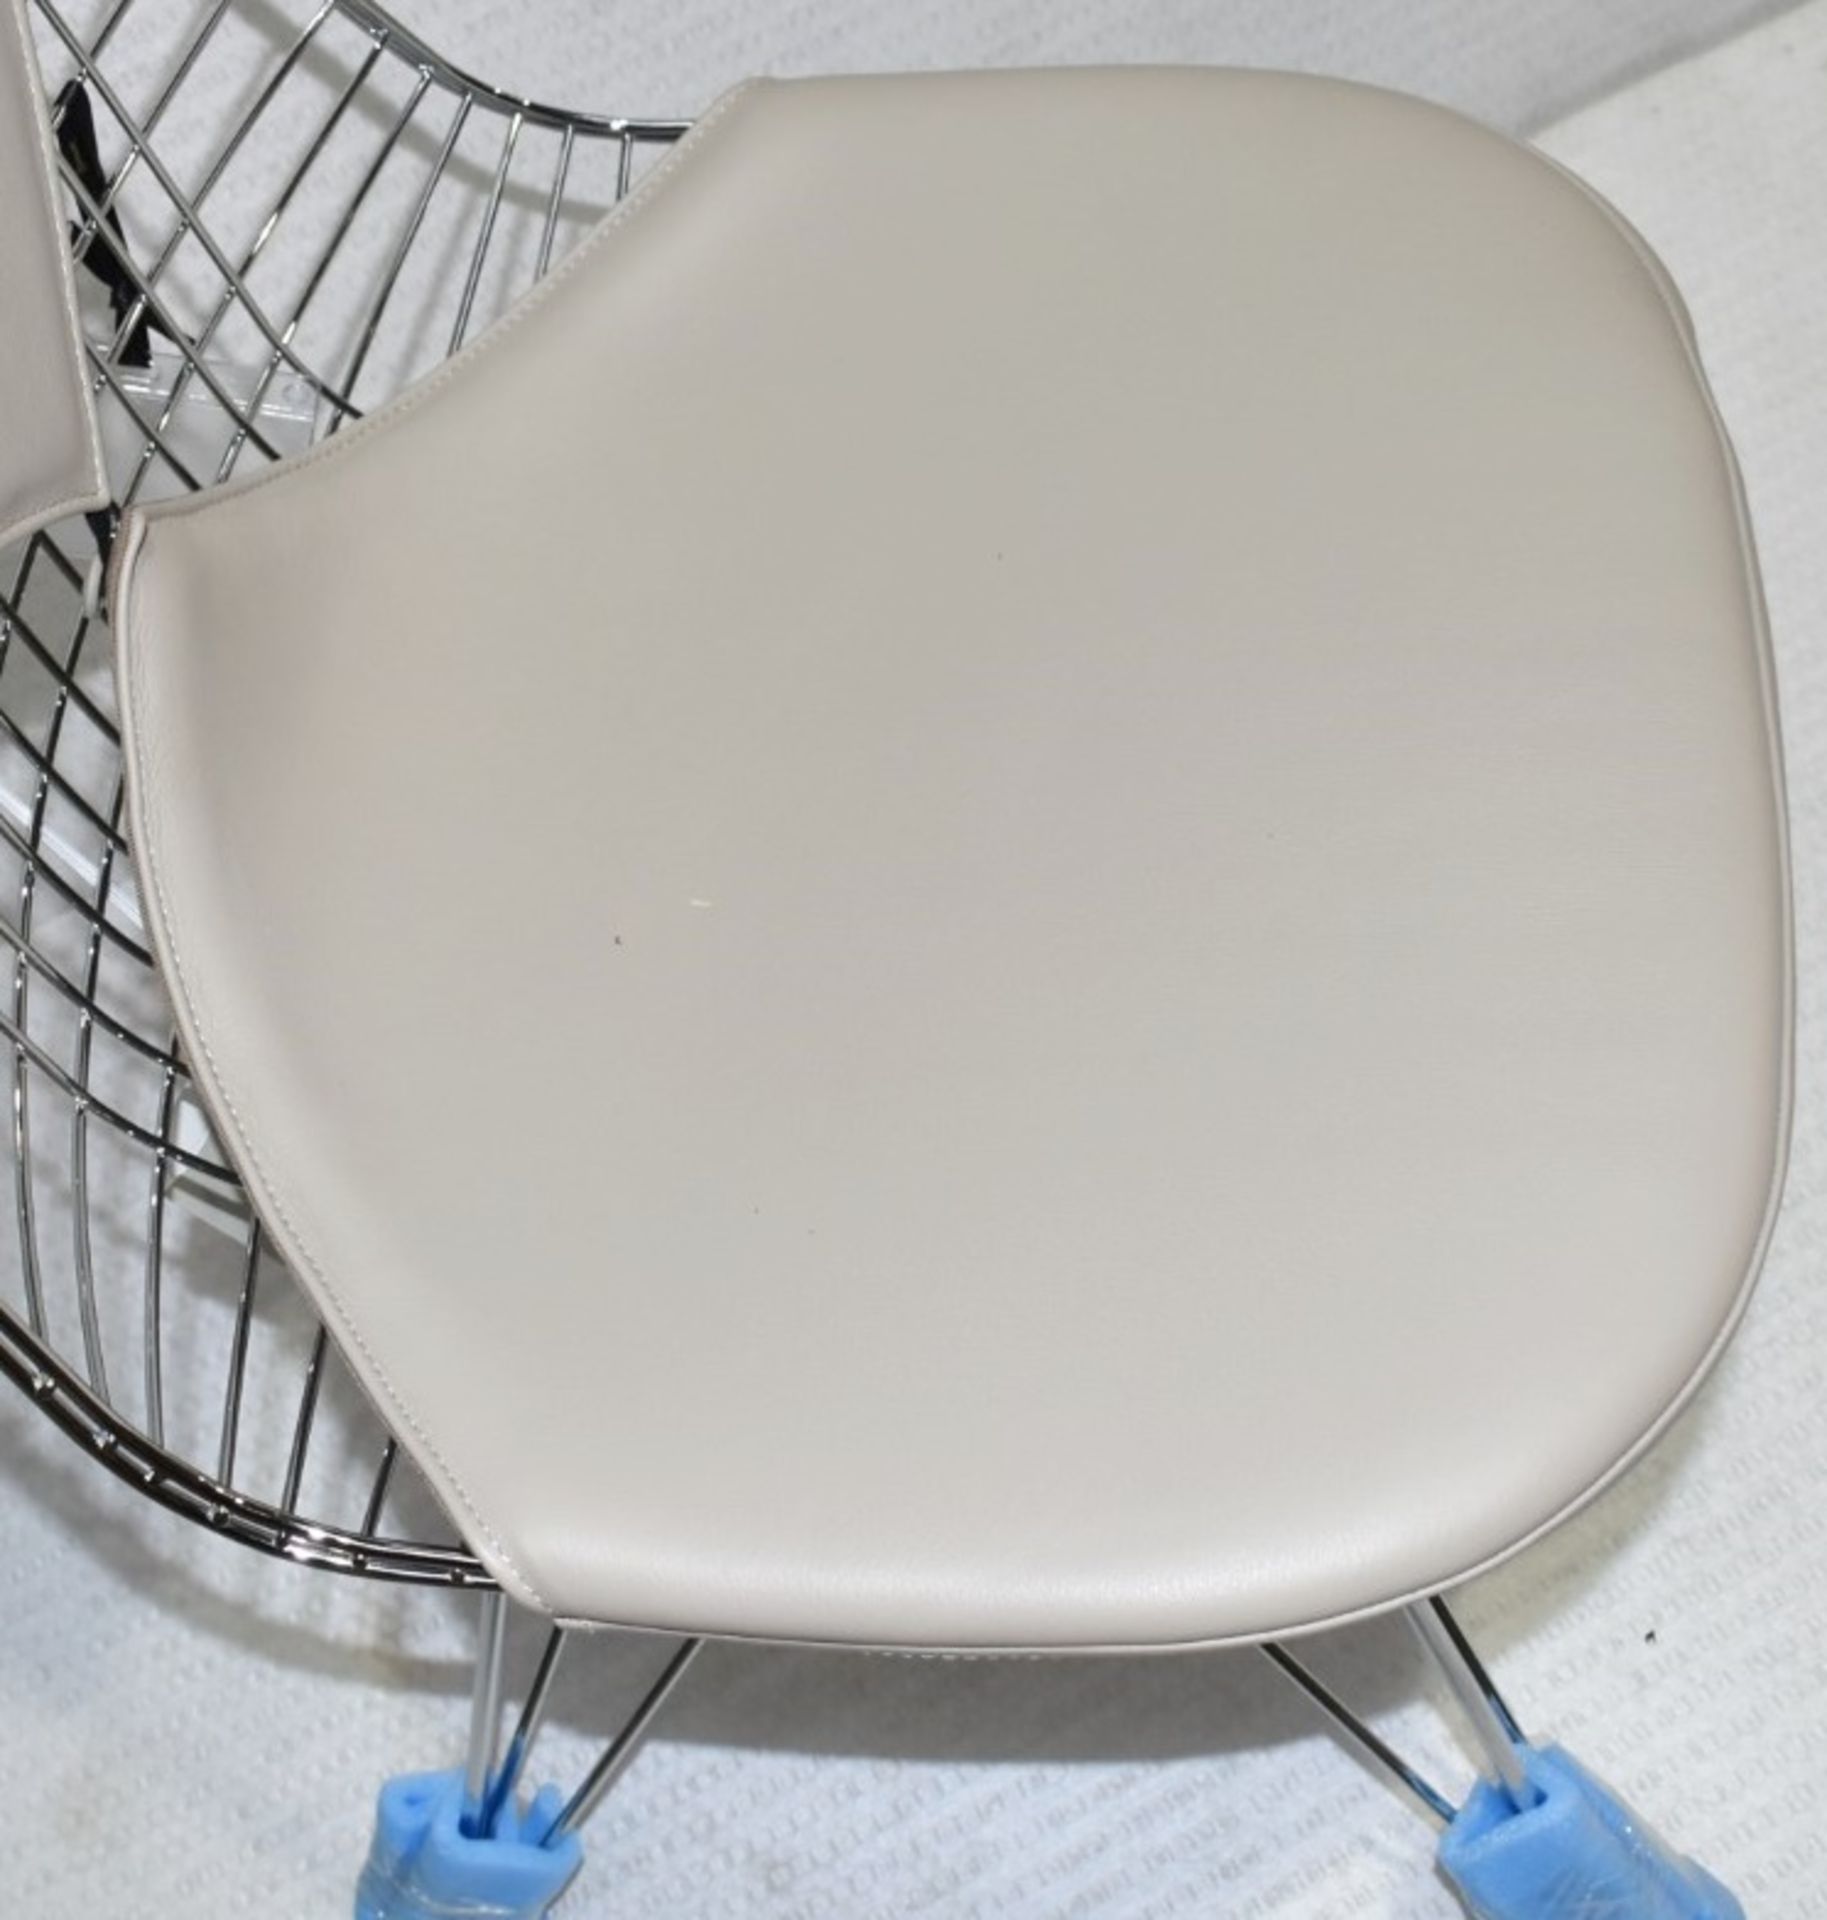 1 x VITRA Eames 'Wire DKR-2' Designer Leather Upholstered Chair in Sand & Chrome - RRP £660.00 - Image 3 of 10